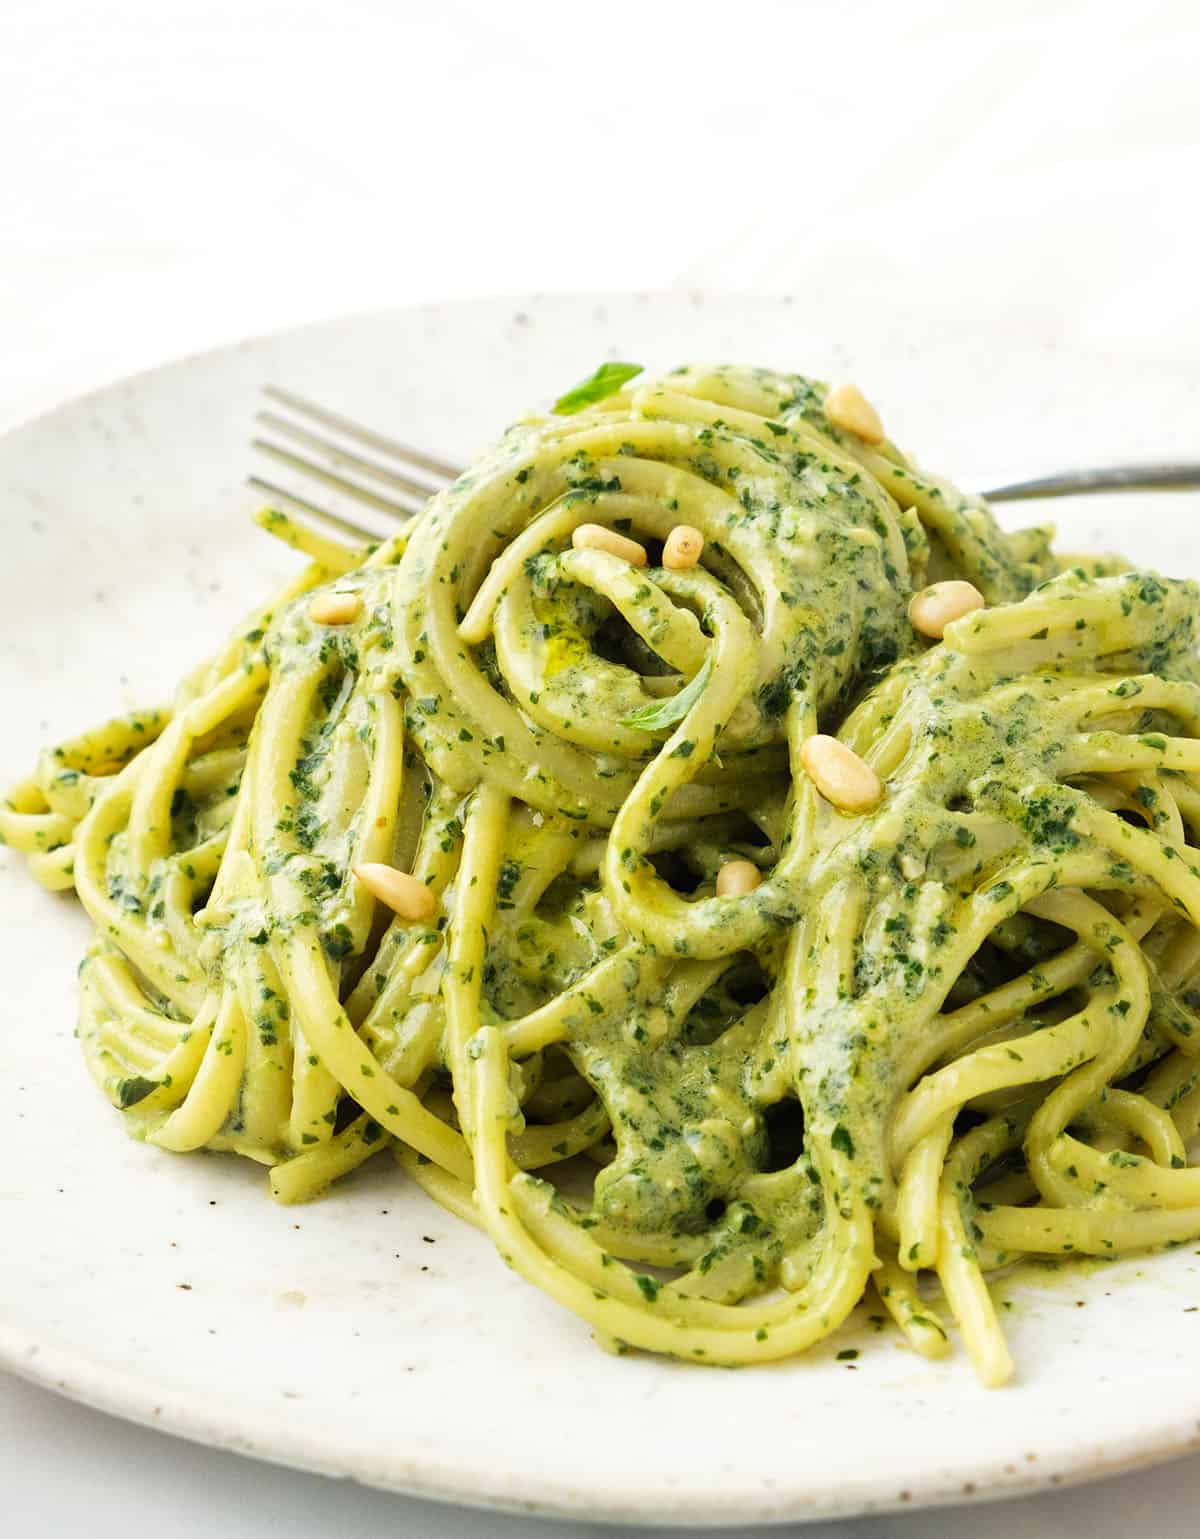 Creamy Pesto Pasta - The clever meal